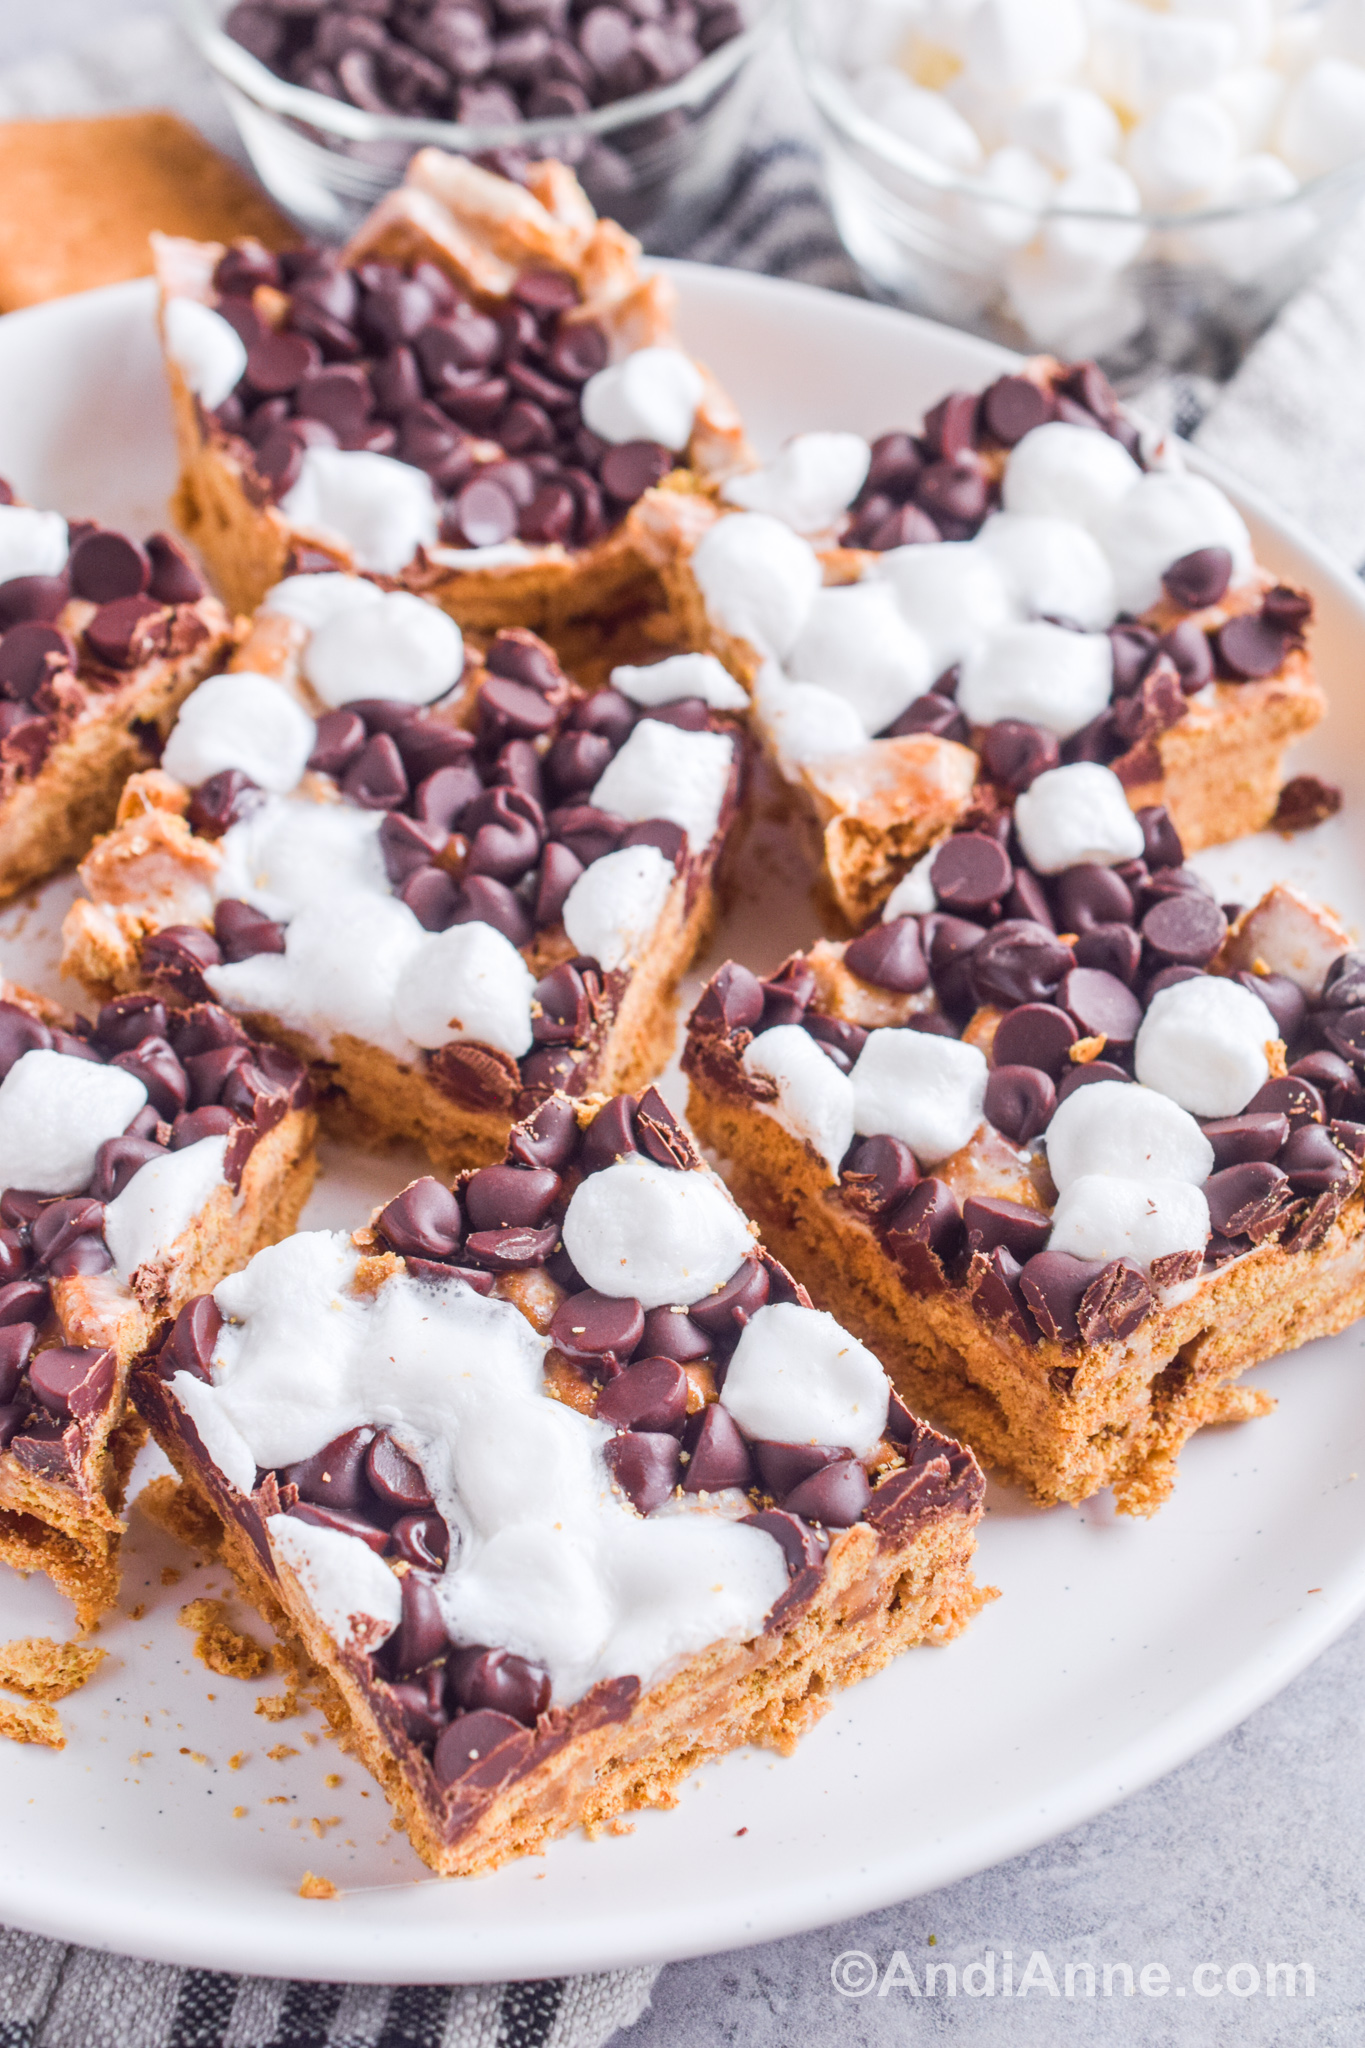 A plate of s'more bars with chocolate chips and marshmallows on top. A bowl of chocolate chips and marshmallows blurred in background.